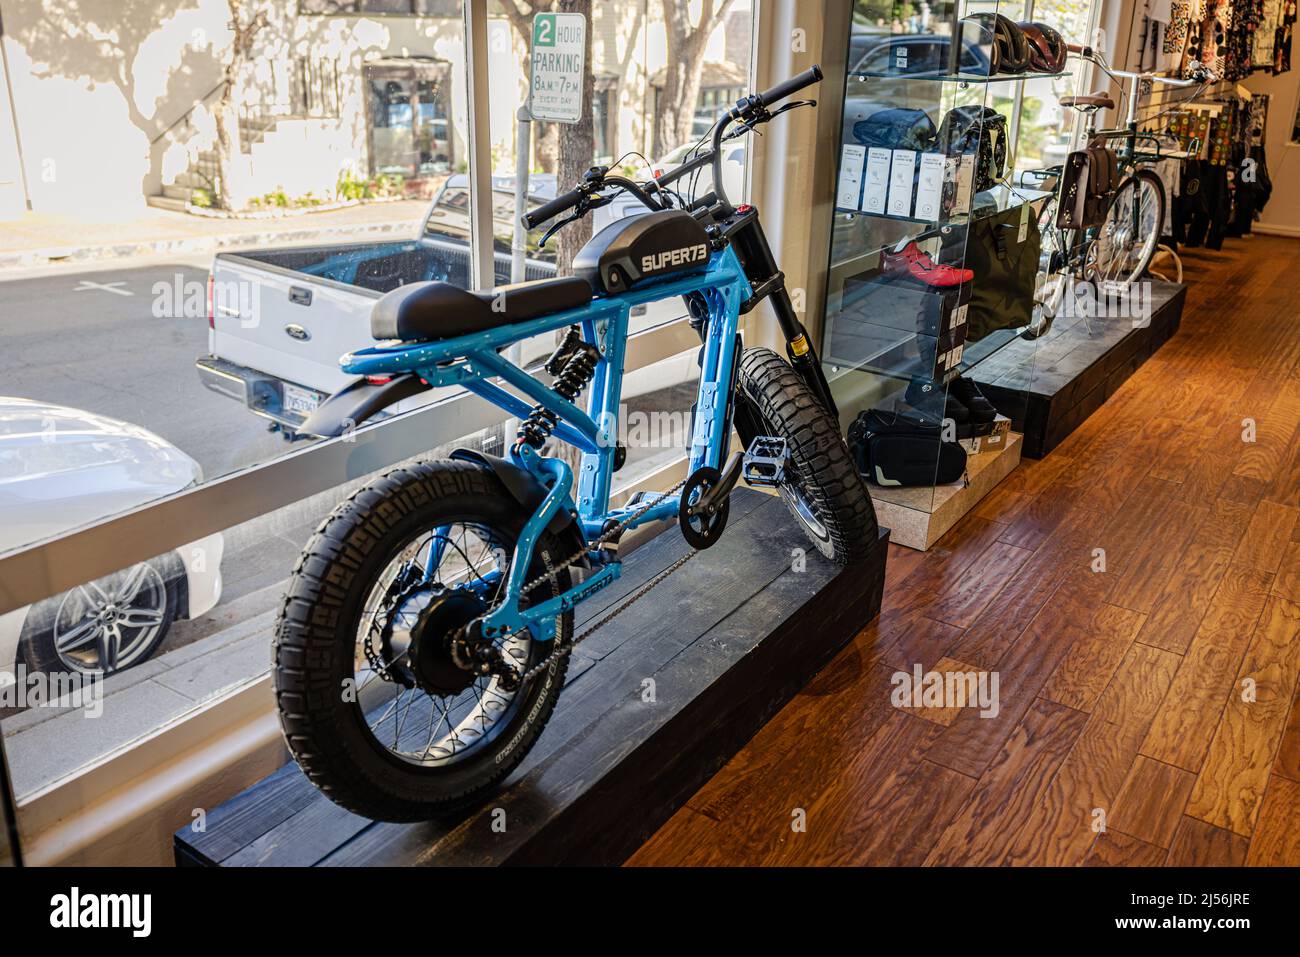 Specialized electric bike, super 73, on display at a bike shop in Carmel CA Stock Photo